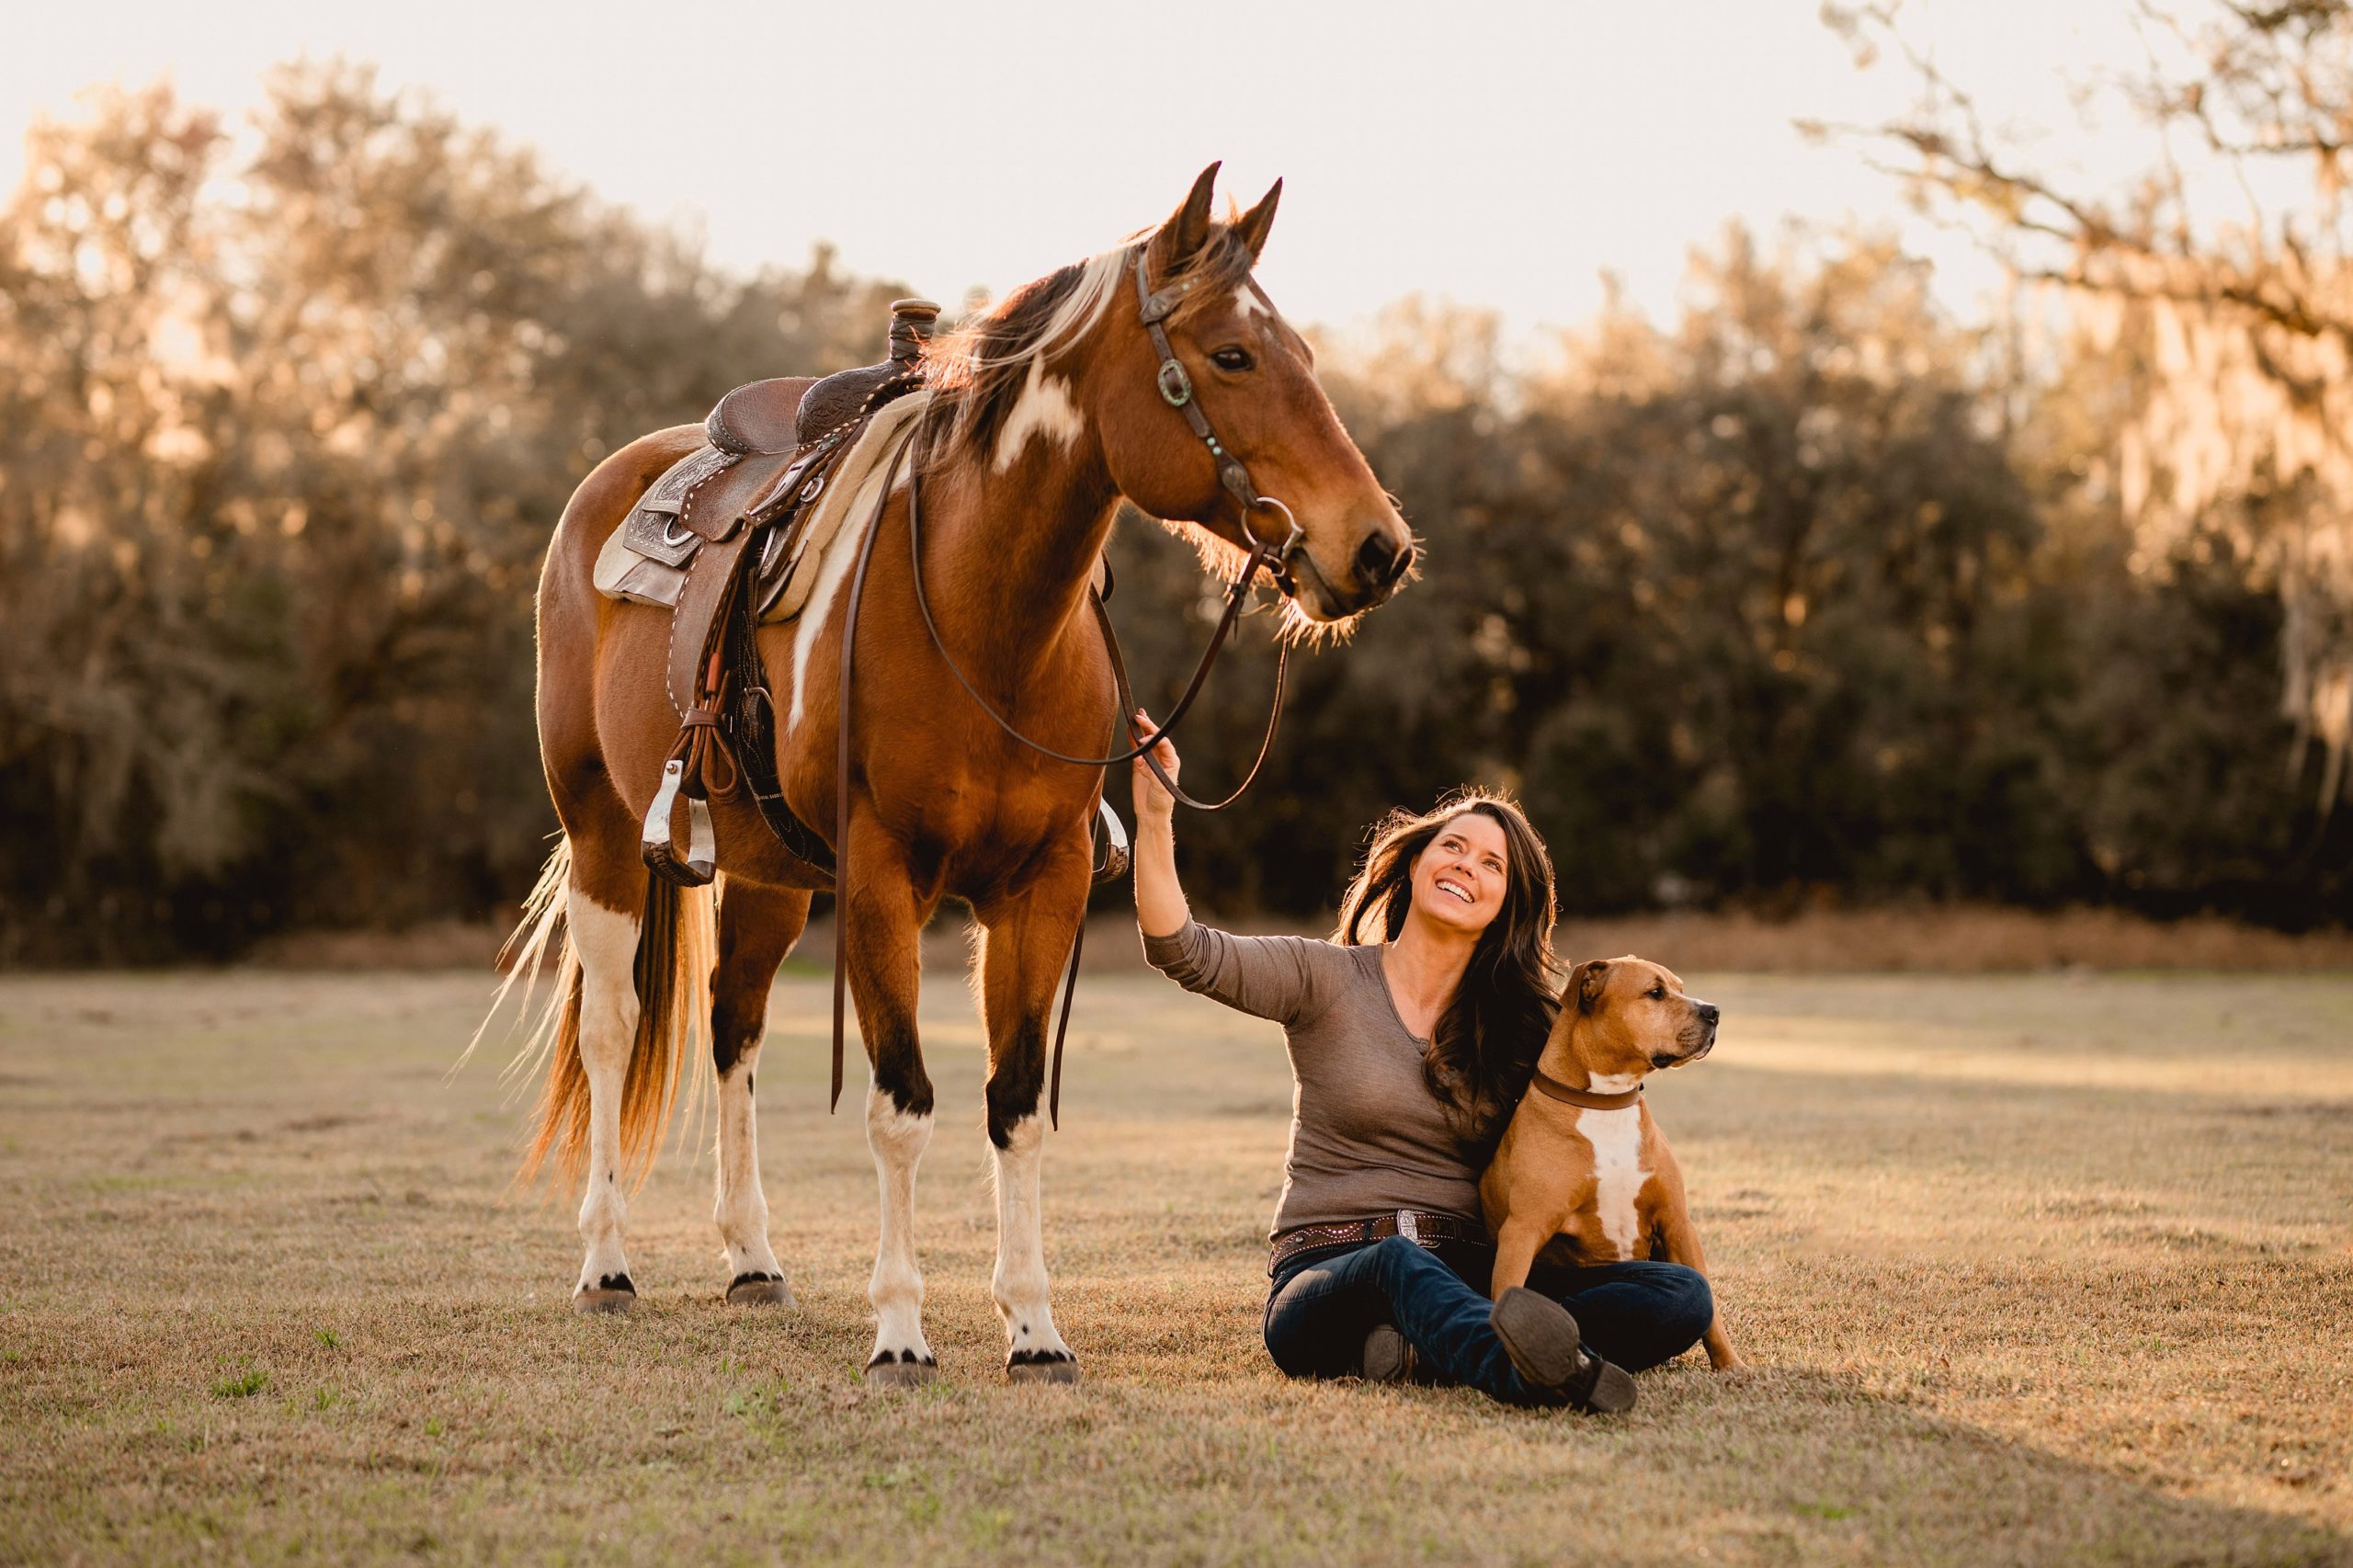 Western horse and rider session in Tallahassee, FL with paint horse and rescue dog.